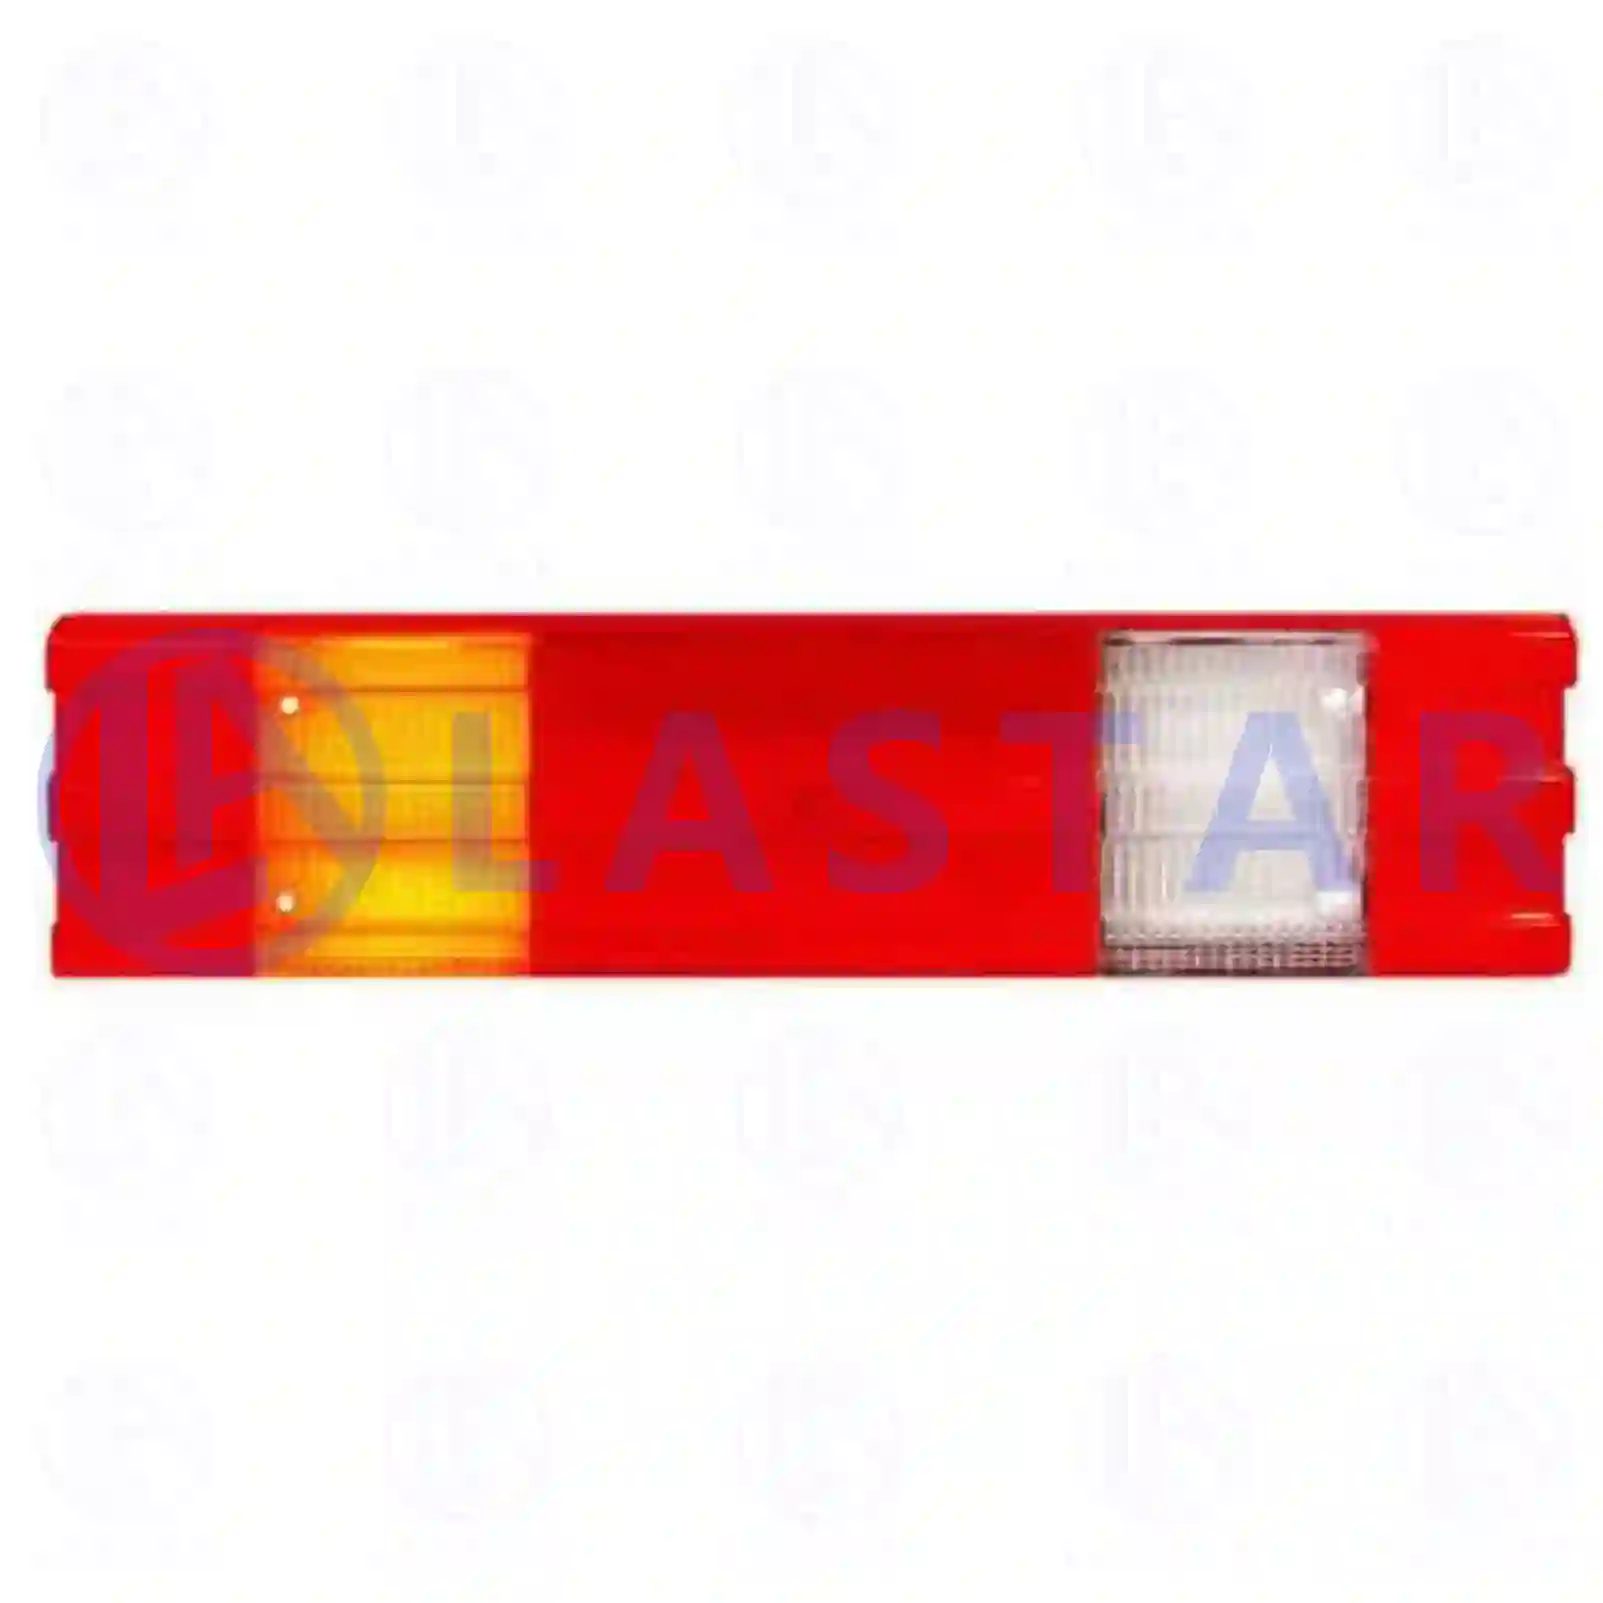 Tail lamp glass, right, 77711692, 879143, 42047212, 4040018, 0025440790, 0025441390, 0025441690, 0025443590, 0025443790, ZG21091-0008 ||  77711692 Lastar Spare Part | Truck Spare Parts, Auotomotive Spare Parts Tail lamp glass, right, 77711692, 879143, 42047212, 4040018, 0025440790, 0025441390, 0025441690, 0025443590, 0025443790, ZG21091-0008 ||  77711692 Lastar Spare Part | Truck Spare Parts, Auotomotive Spare Parts